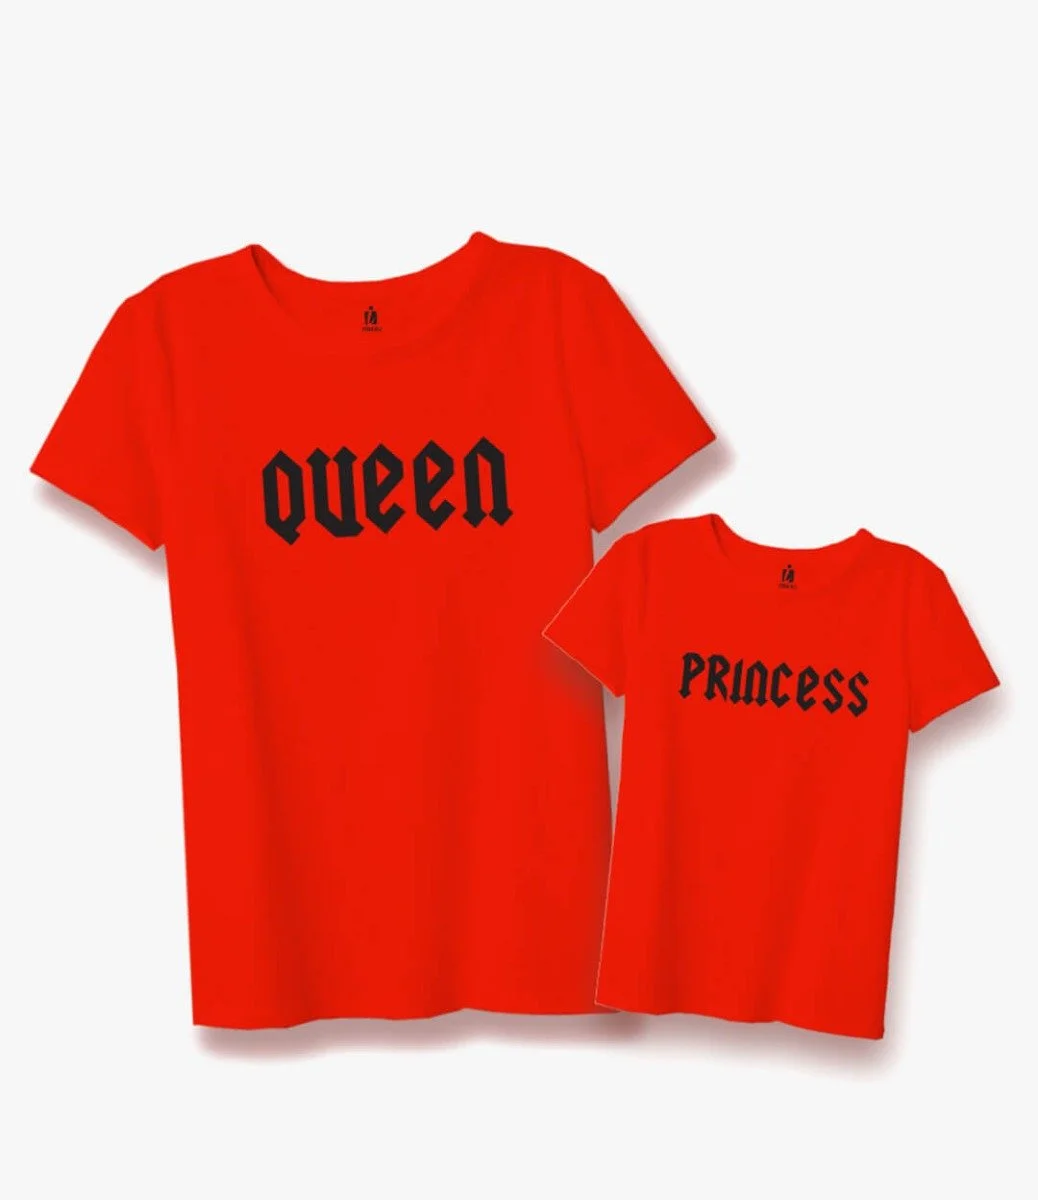 Queen, Princess Mother and Daughter T-Shirts